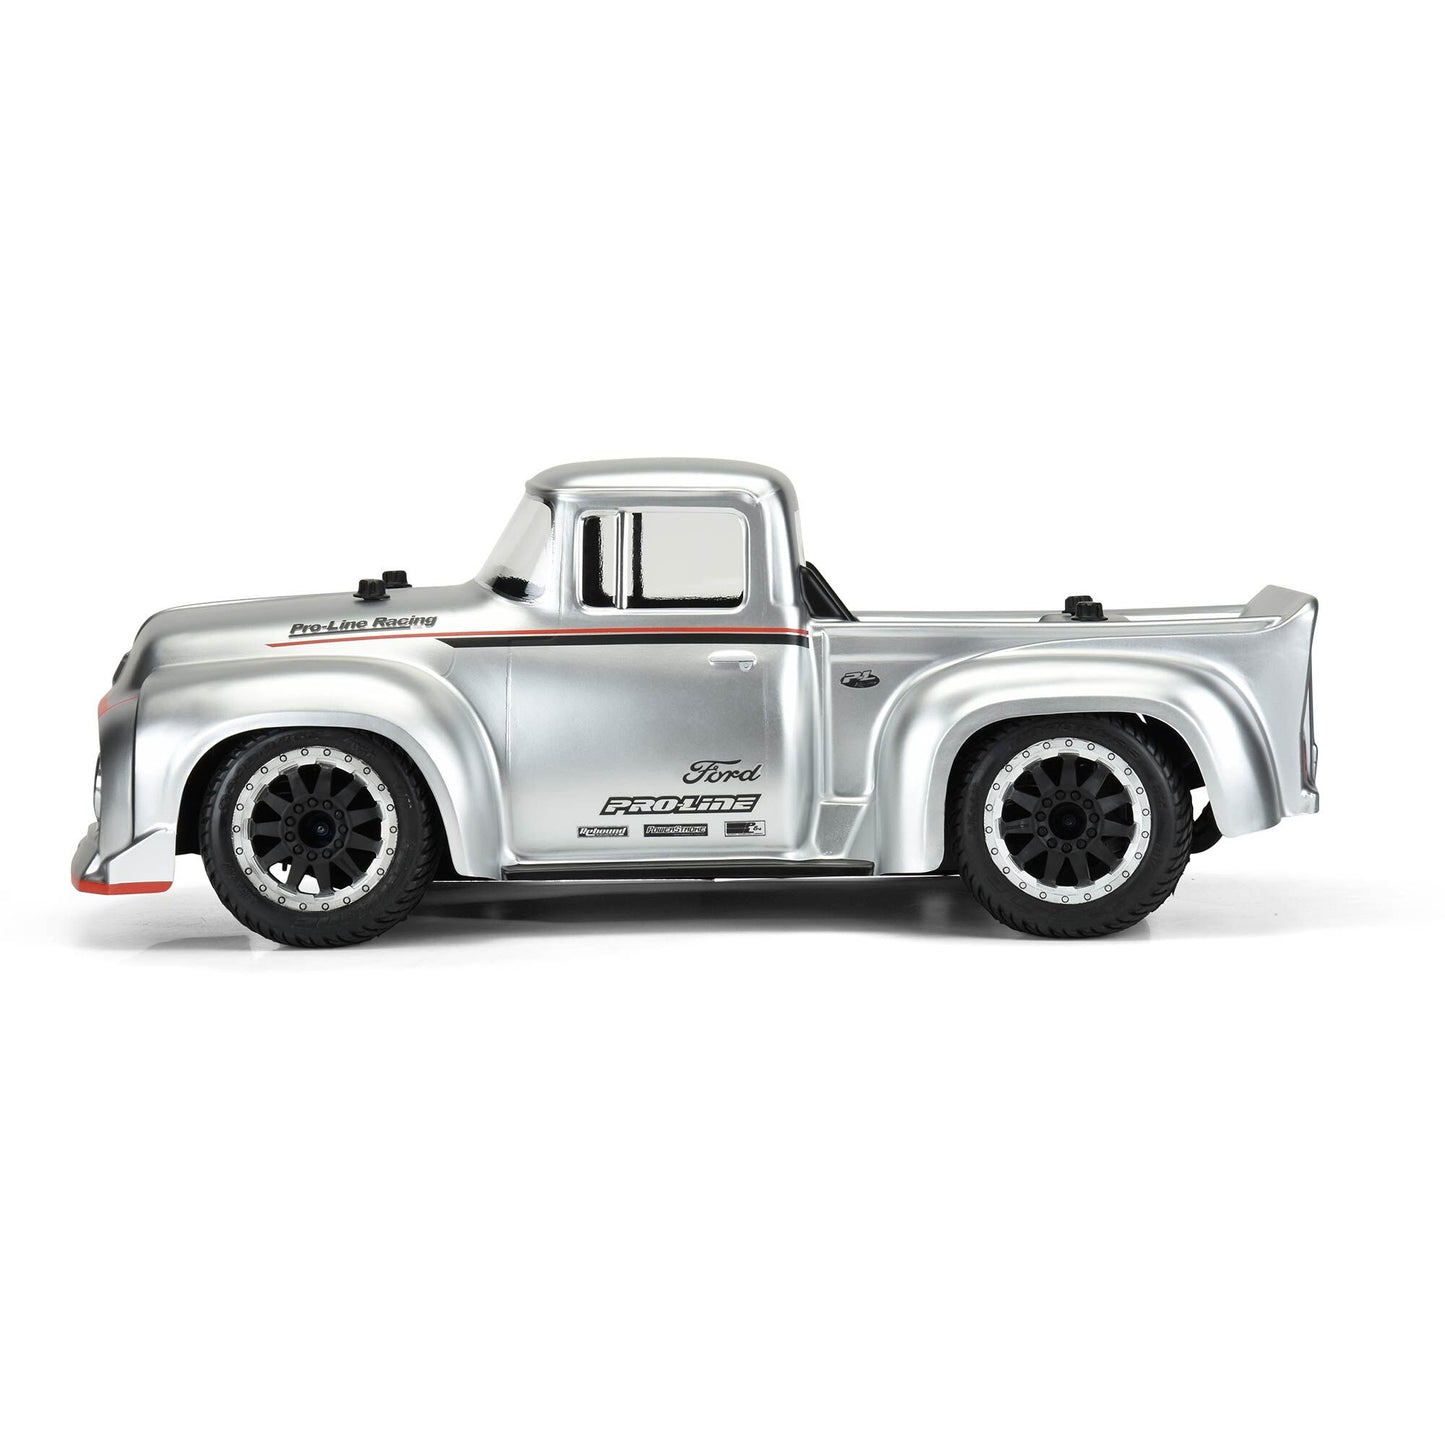 Pro-Line®1/10 1956 Ford F-100 Pro-Touring Street Truck Clear Body